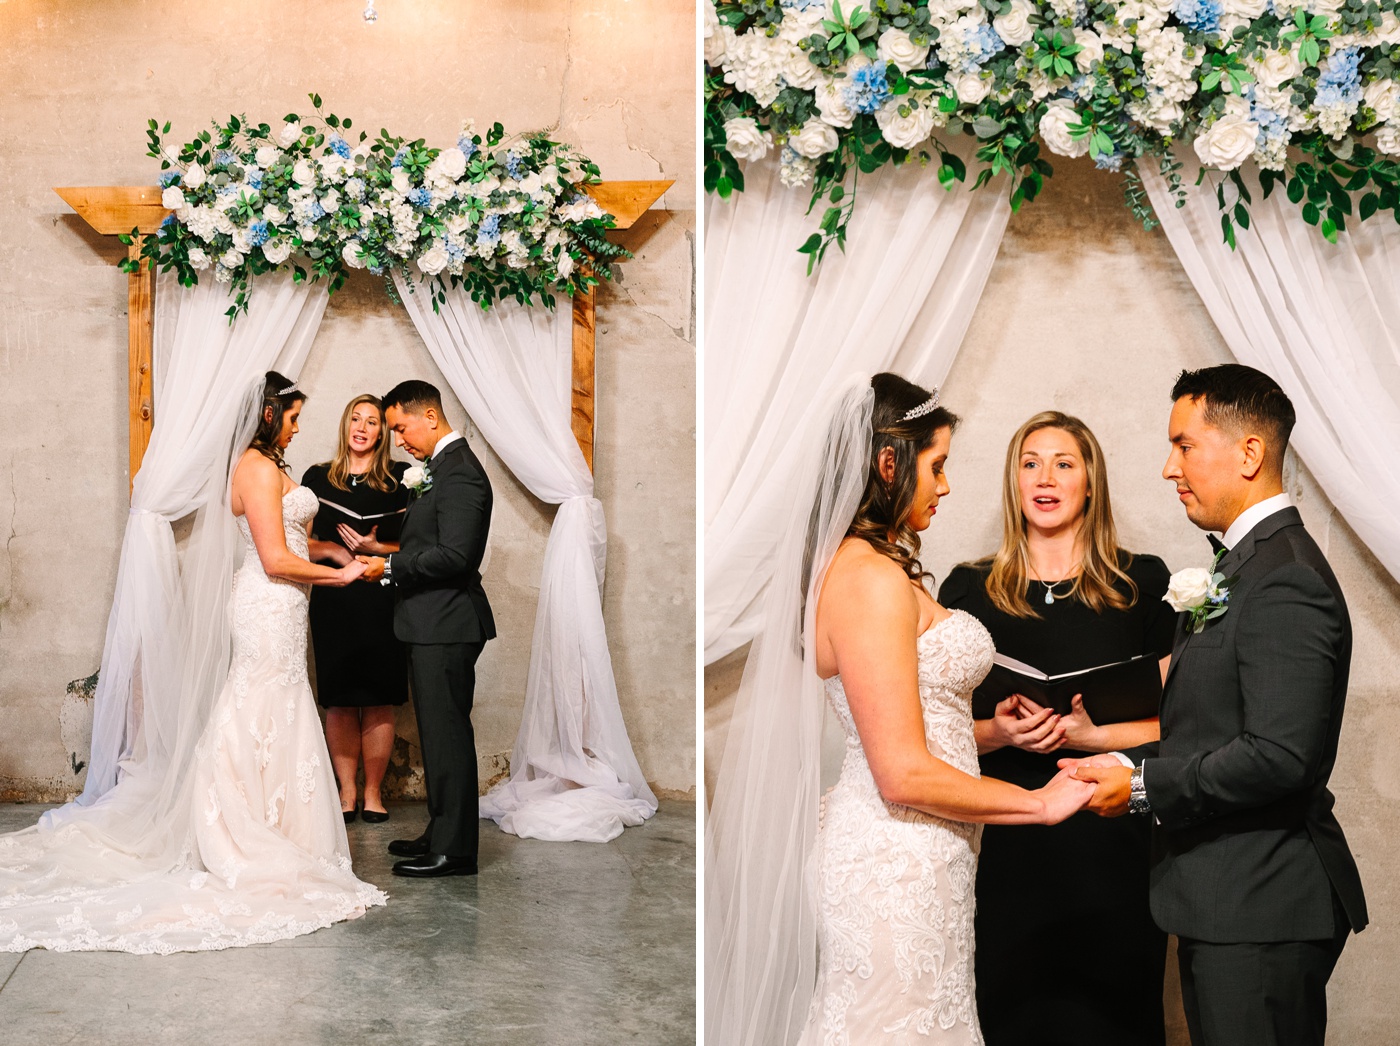 Why Just the Two of Us is the best Indianapolis wedding officiant